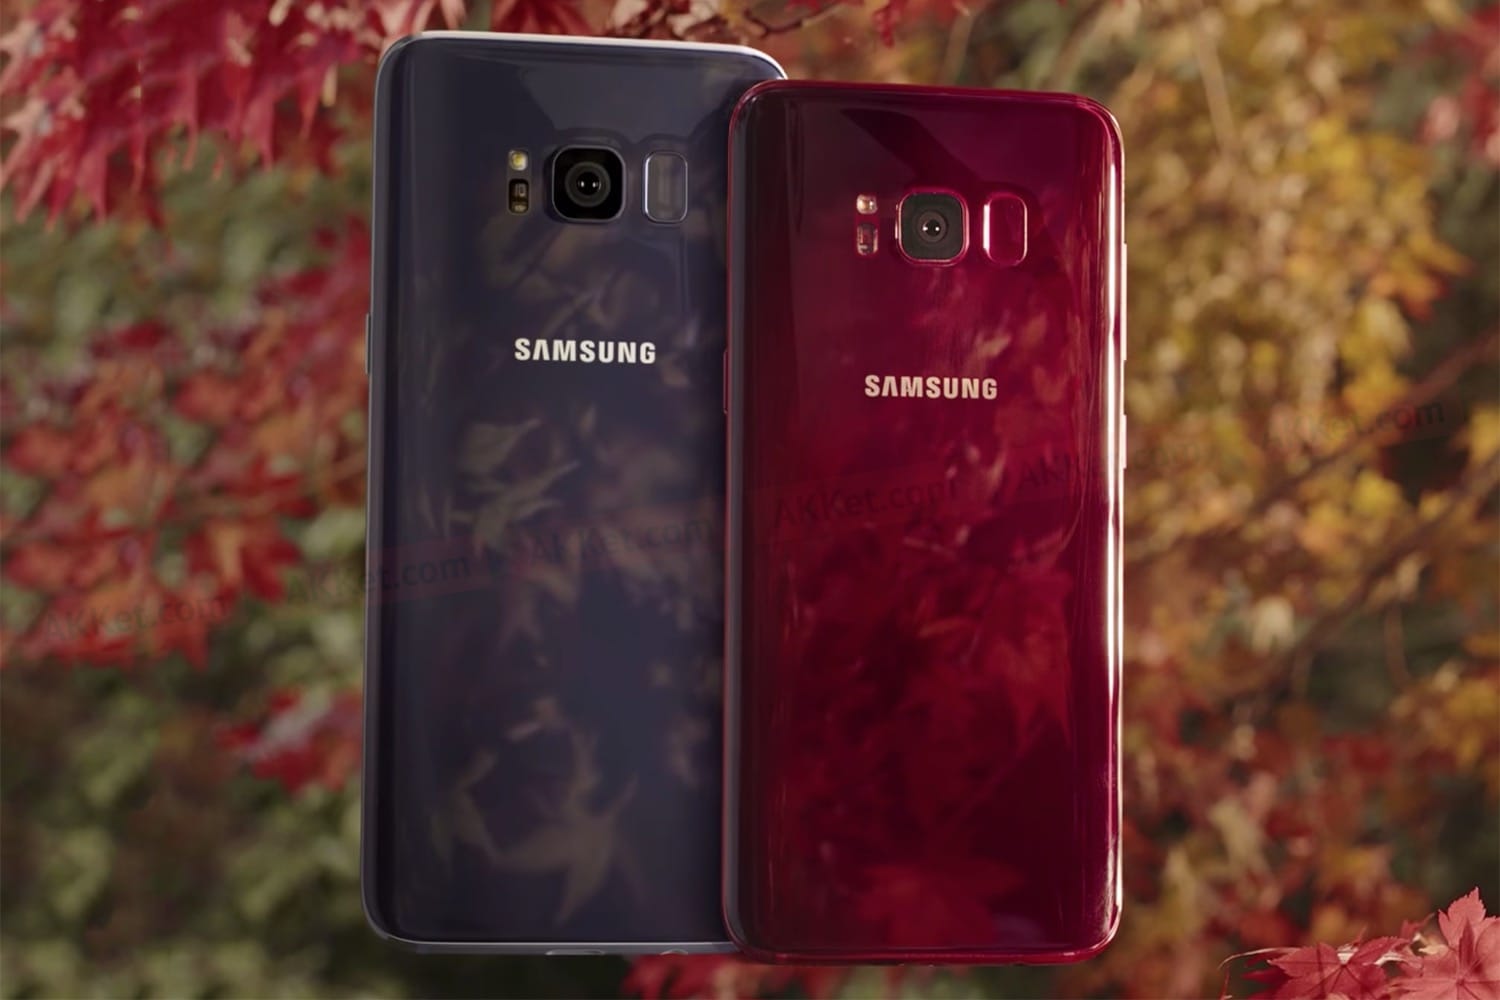 Samsung Galaxy S8 now available in ‘Burgundy Red’ colour